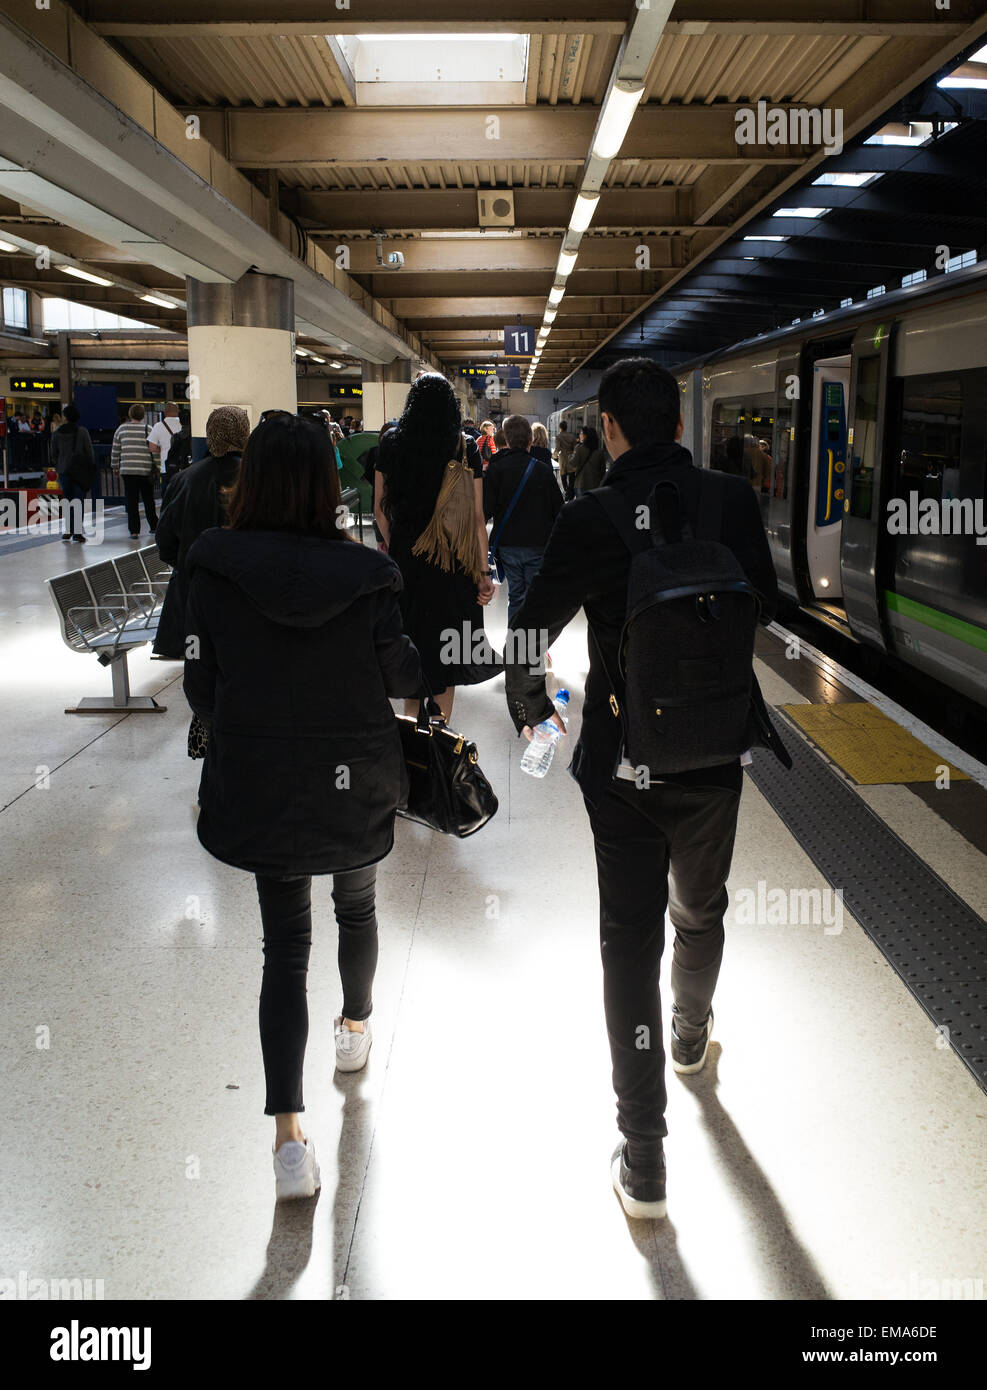 Passengers walk along a platform at Euston station, London, after alighting from a train. Stock Photo